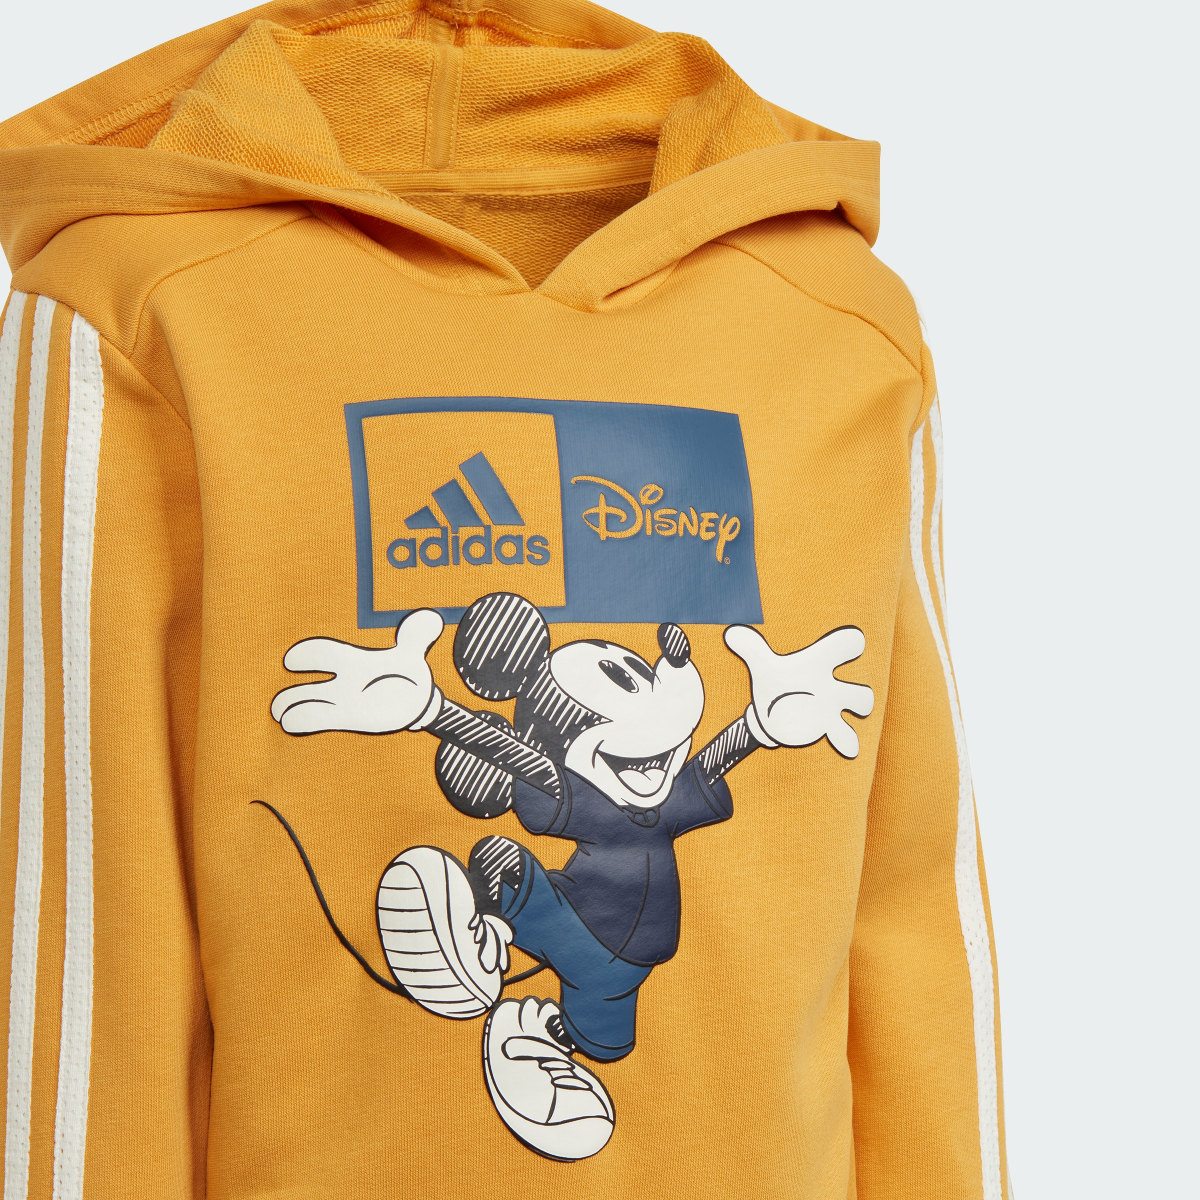 Adidas x Disney Mickey Mouse Hoodie and Jogger Set. 7